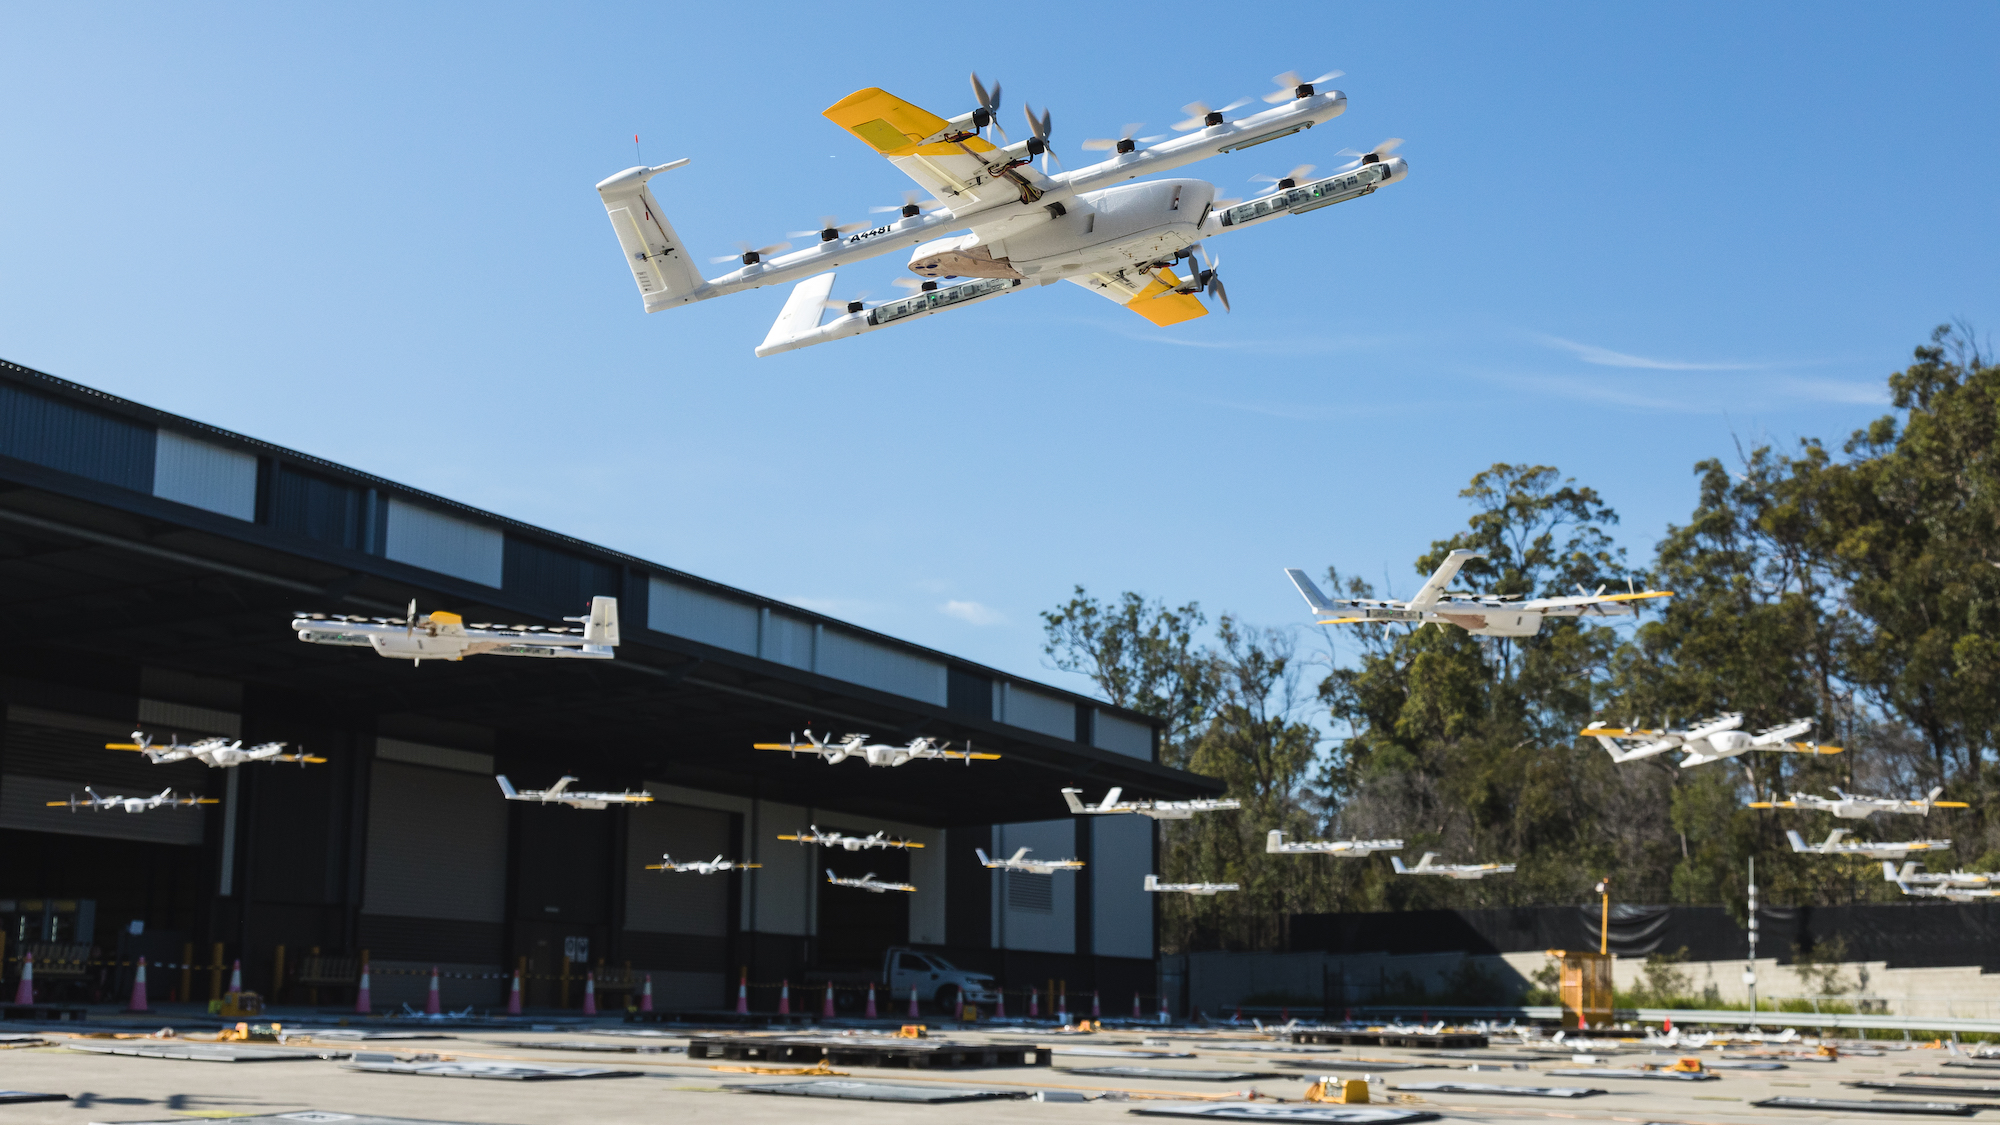 Save a parking spot for Wing’s slick new ‘AutoLoader’ for drones